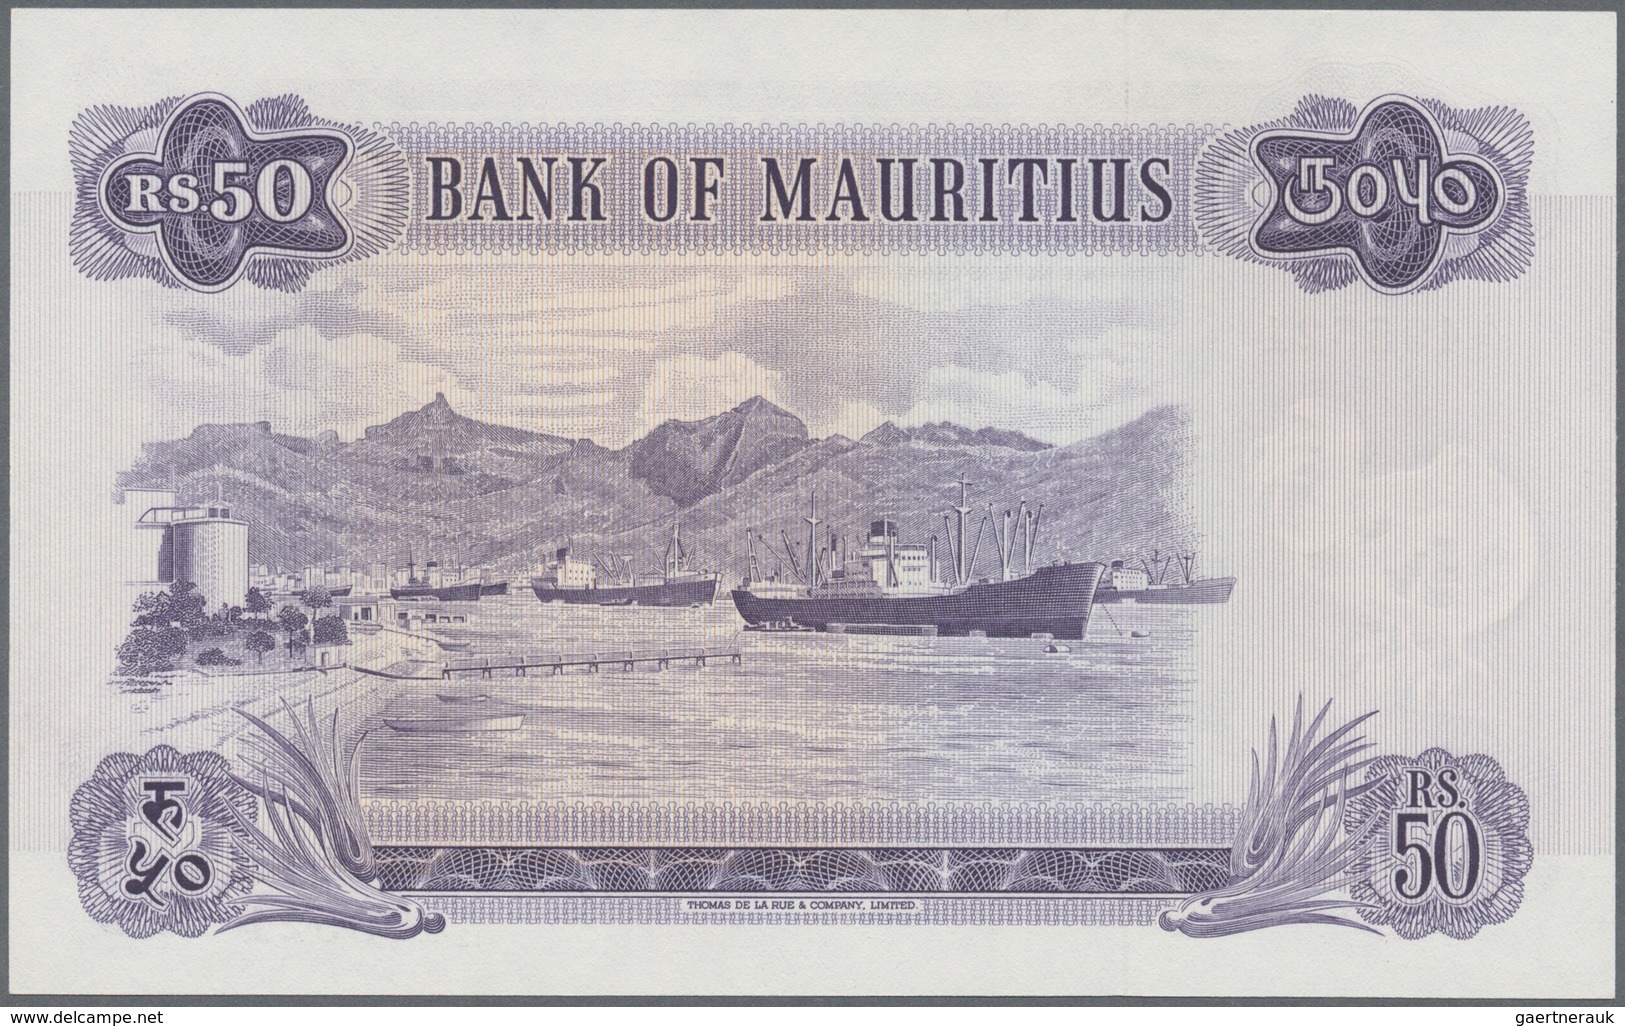 Mauritius: Set with 8 Banknotes 1967 5 Rupees A/46 581027, 25 Rupees A/11 116320. 50 Rupees 6x A/12